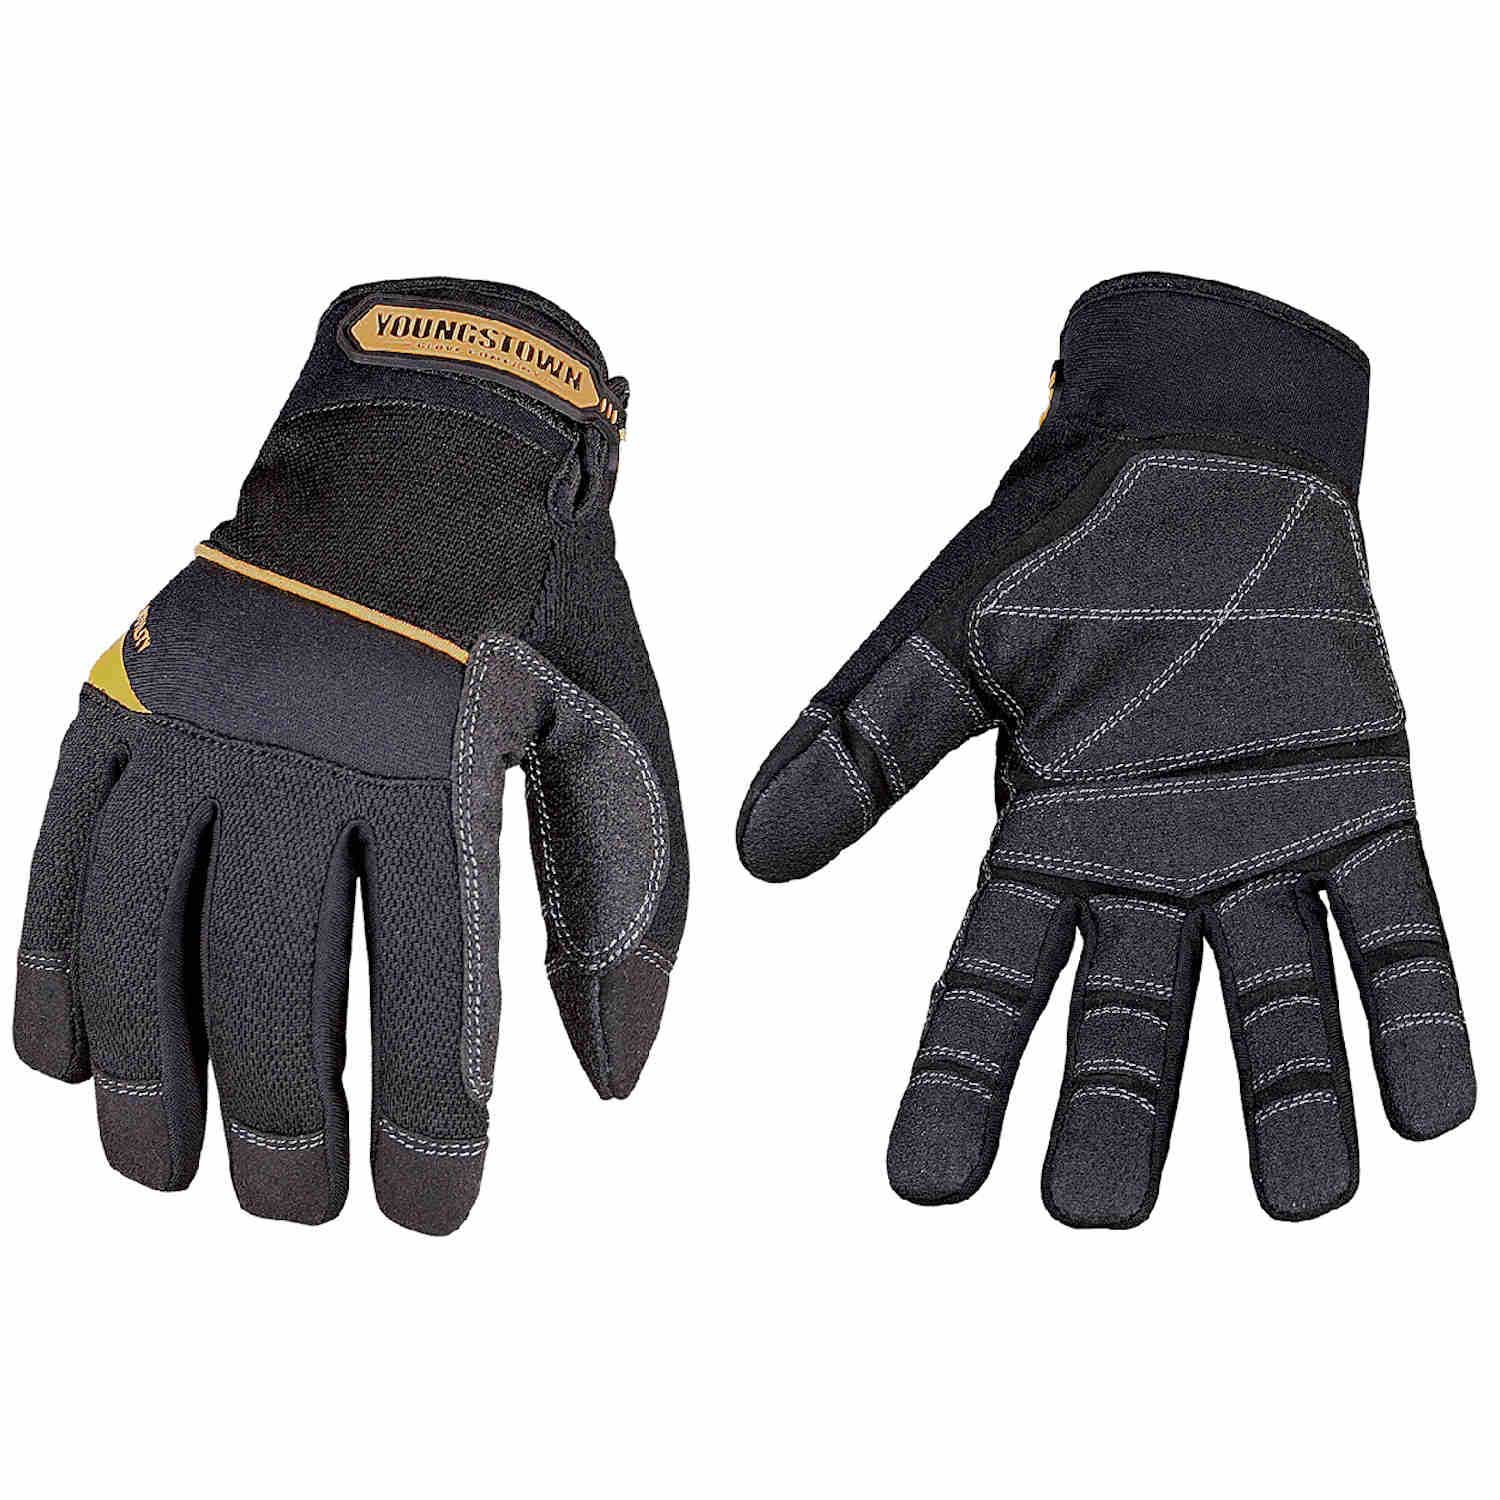 Youngstown Glove General Utility Plus Glove